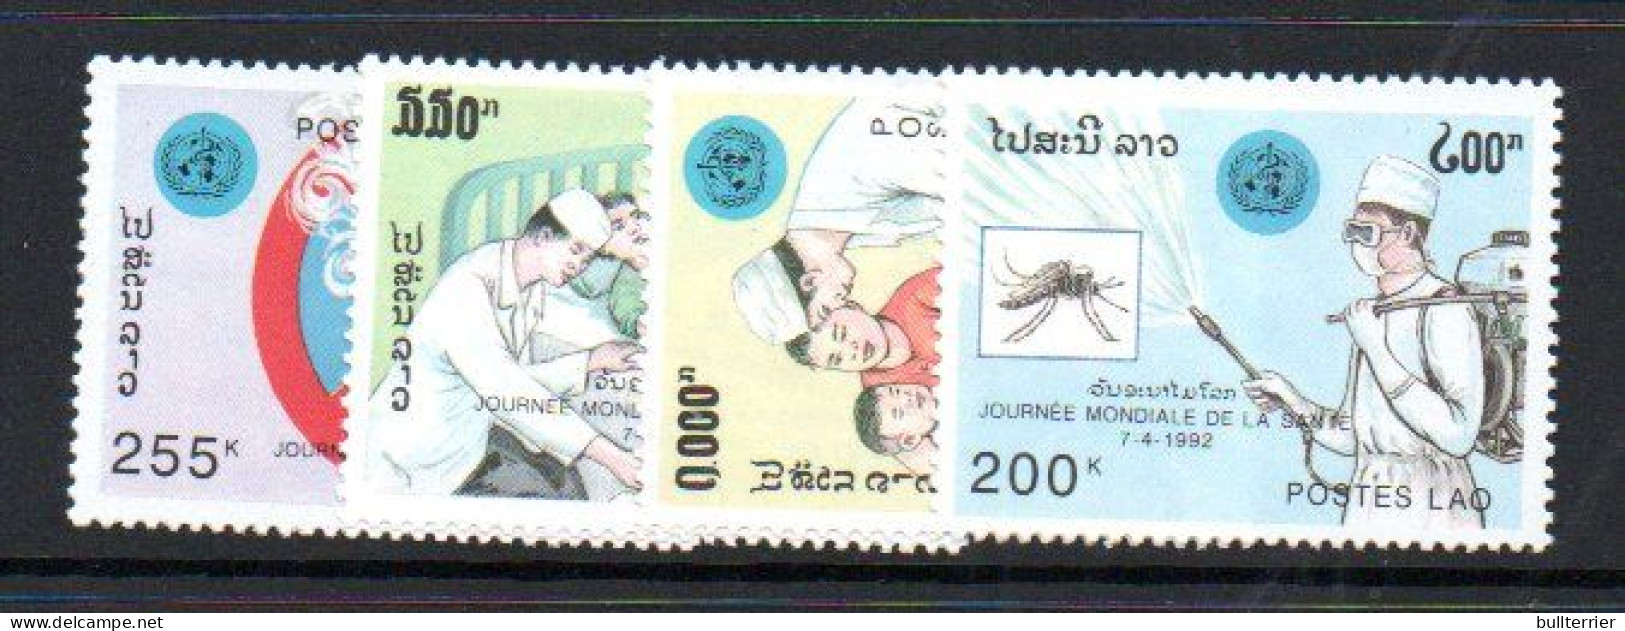 LAOS - 1992 - WORLD HEALTH DAY SET OF 4 MINT NEVER HINGED - Laos